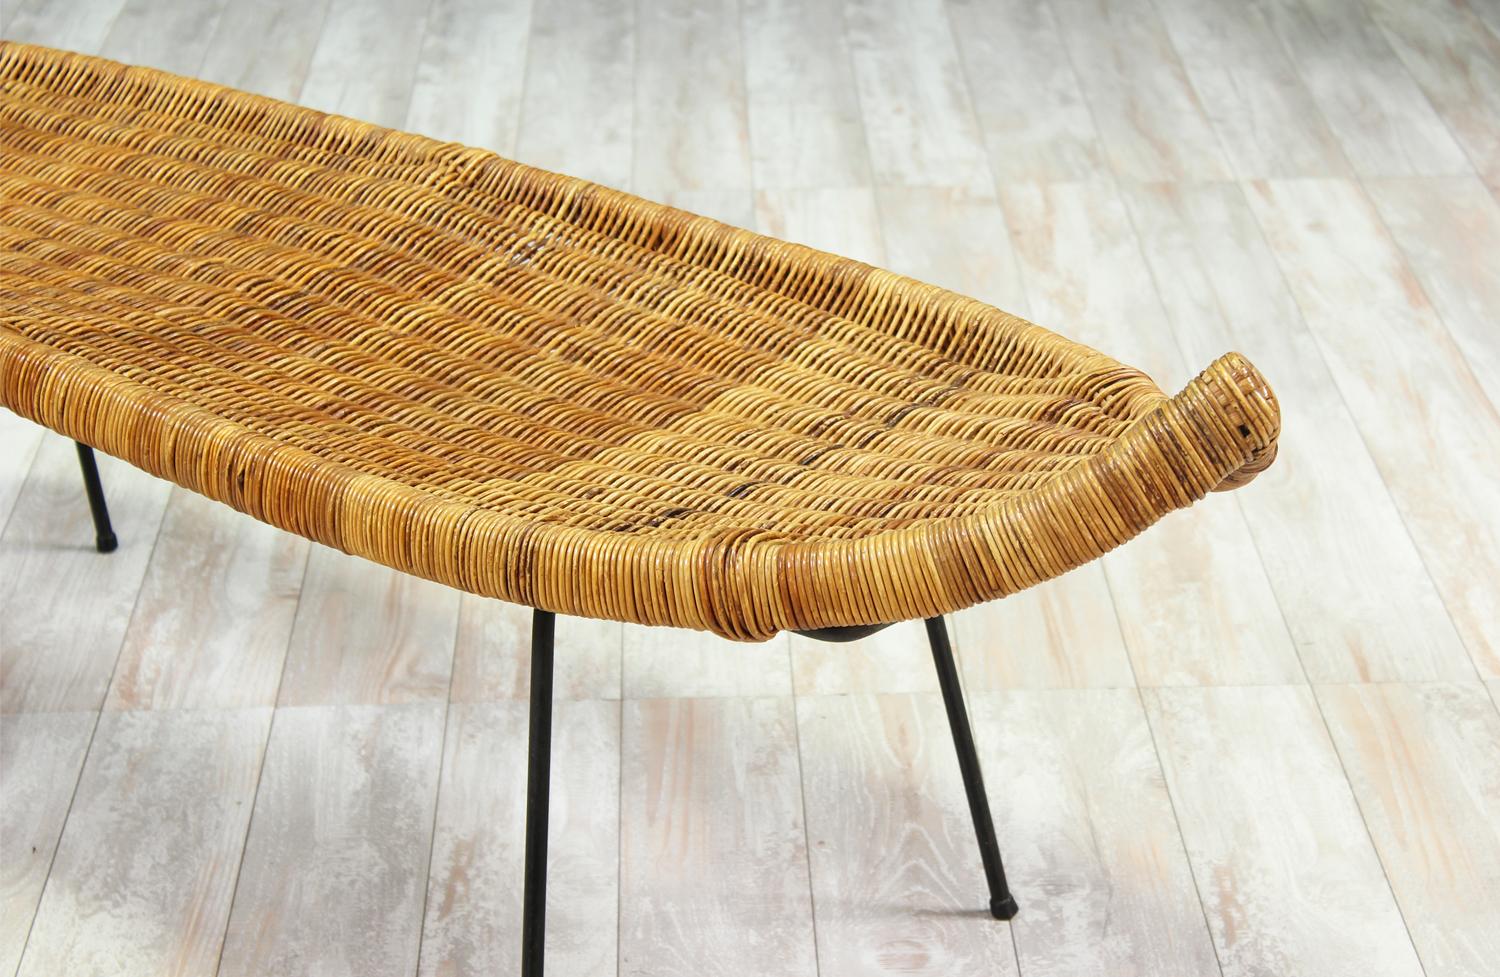 Mid-20th Century Danny Ho Fong Woven Cane Bench for Tropi-Cal